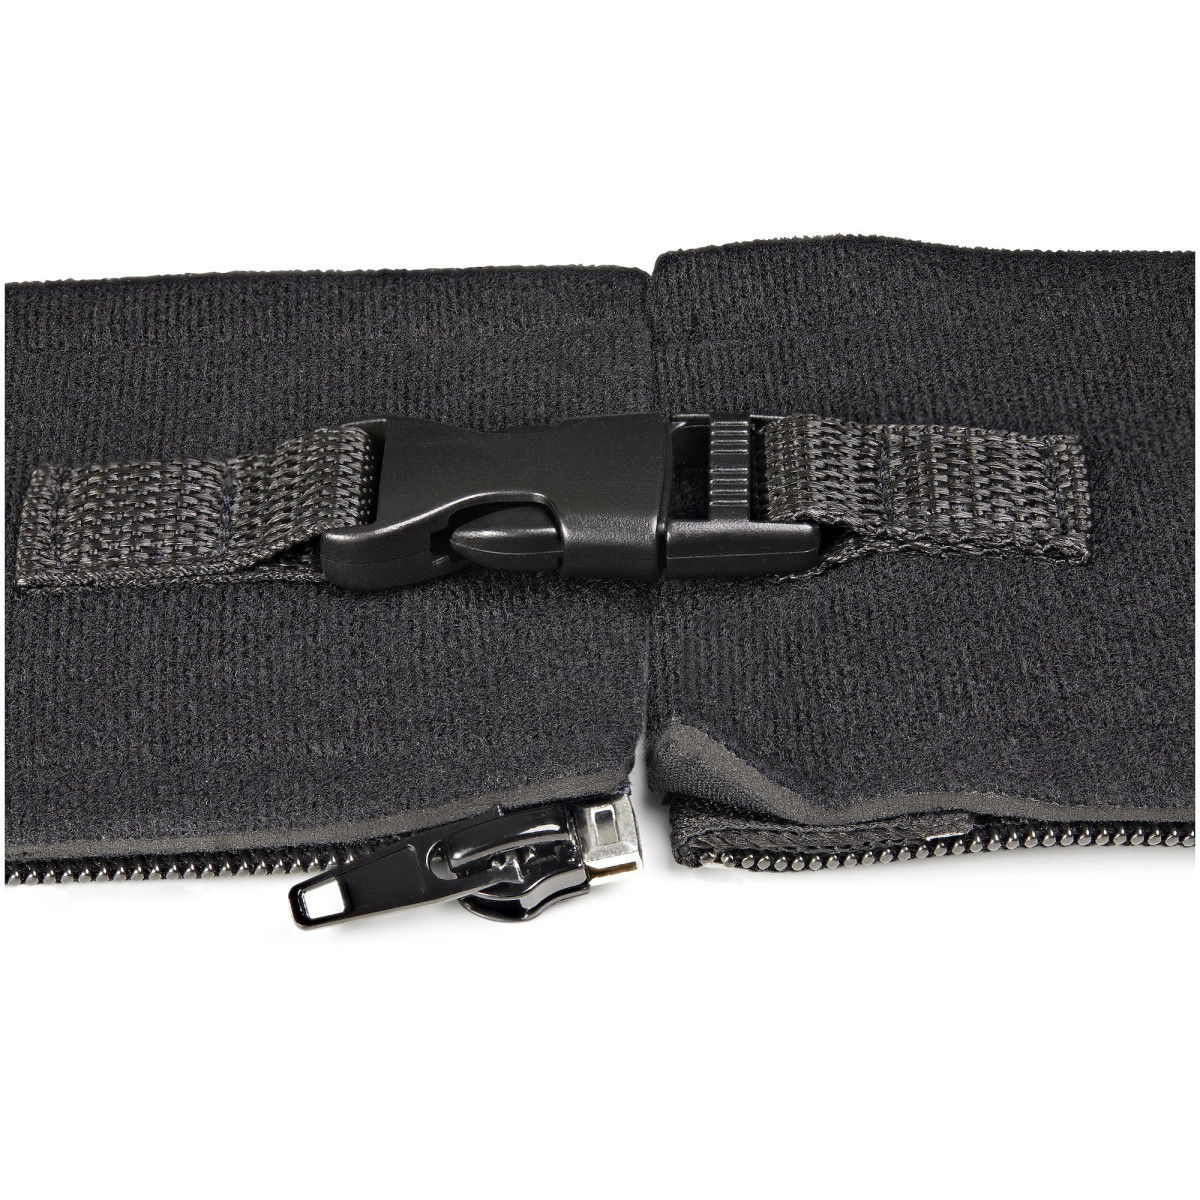 40inch Neoprene Cable Management Sleeve